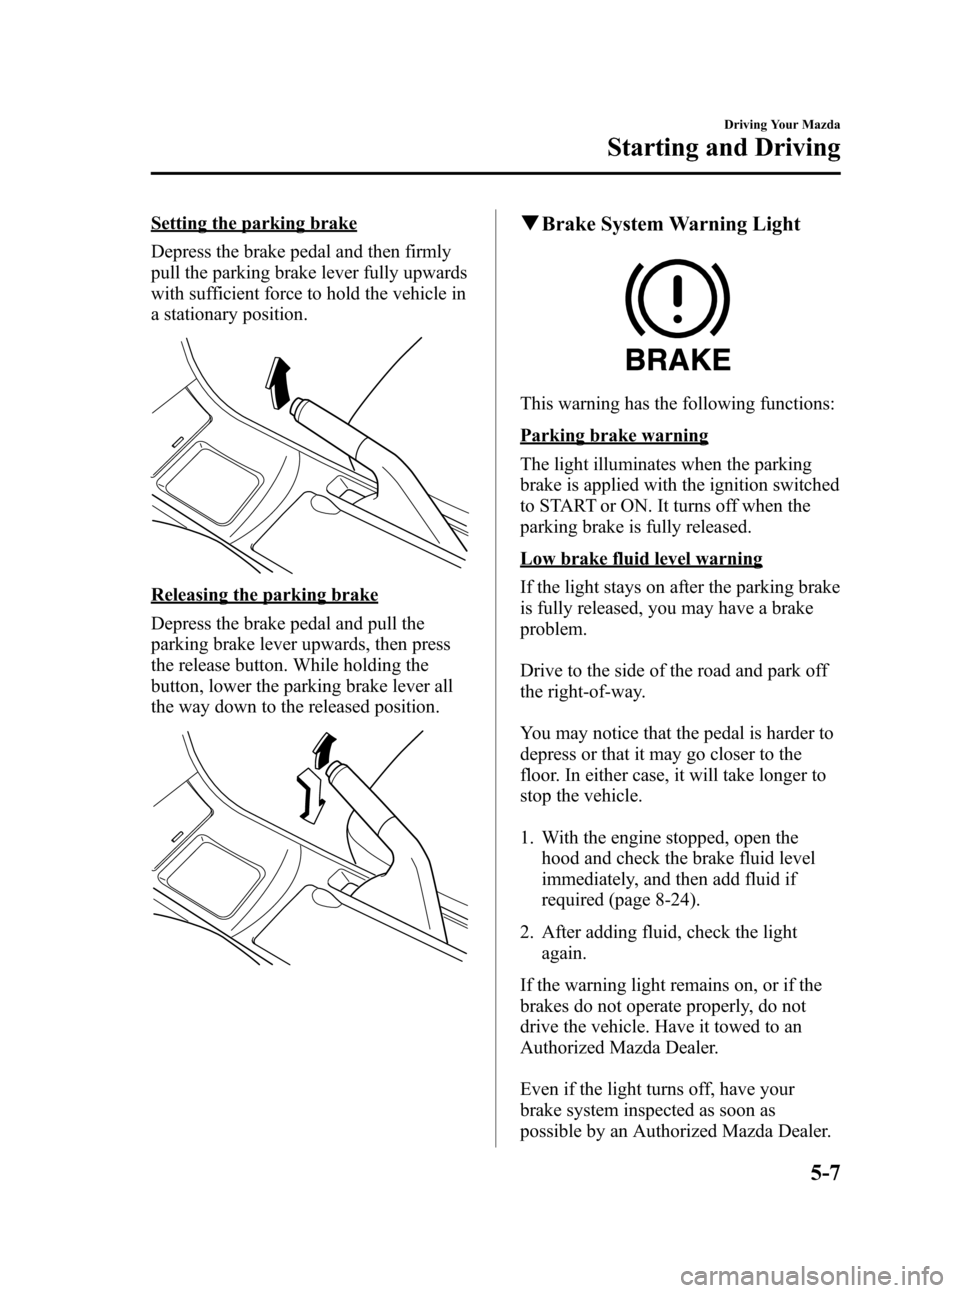 MAZDA MODEL 3 HATCHBACK 2012  Owners Manual (in English) Black plate (169,1)
Setting the parking brake
Depress the brake pedal and then firmly
pull the parking brake lever fully upwards
with sufficient force to hold the vehicle in
a stationary position.
Rel